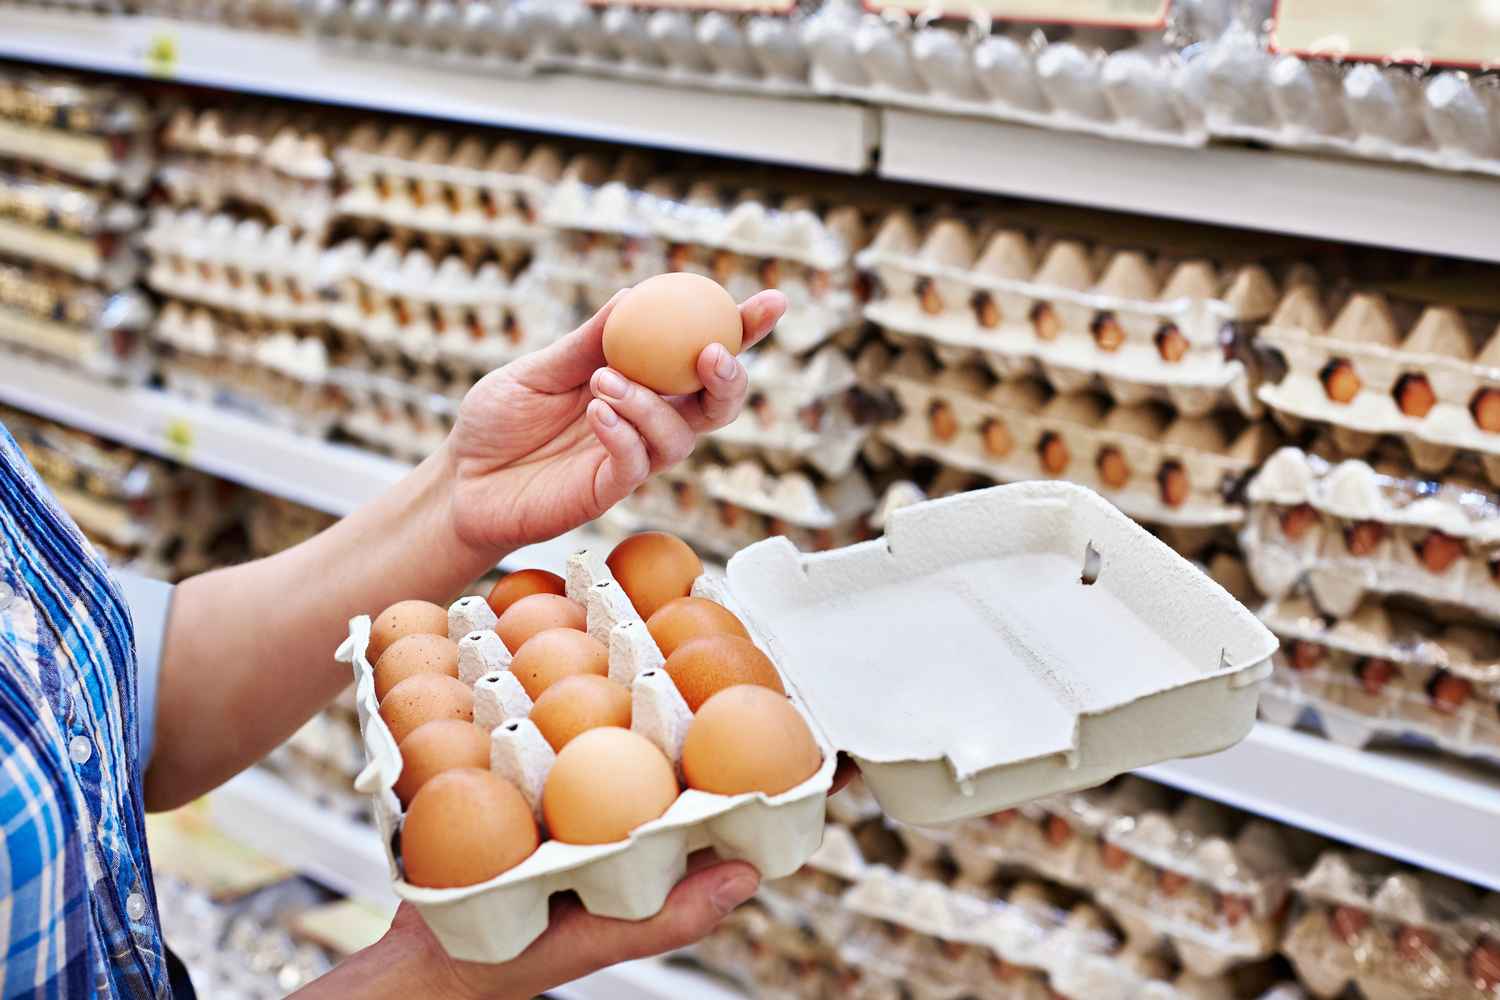 women selecting eggs from shop